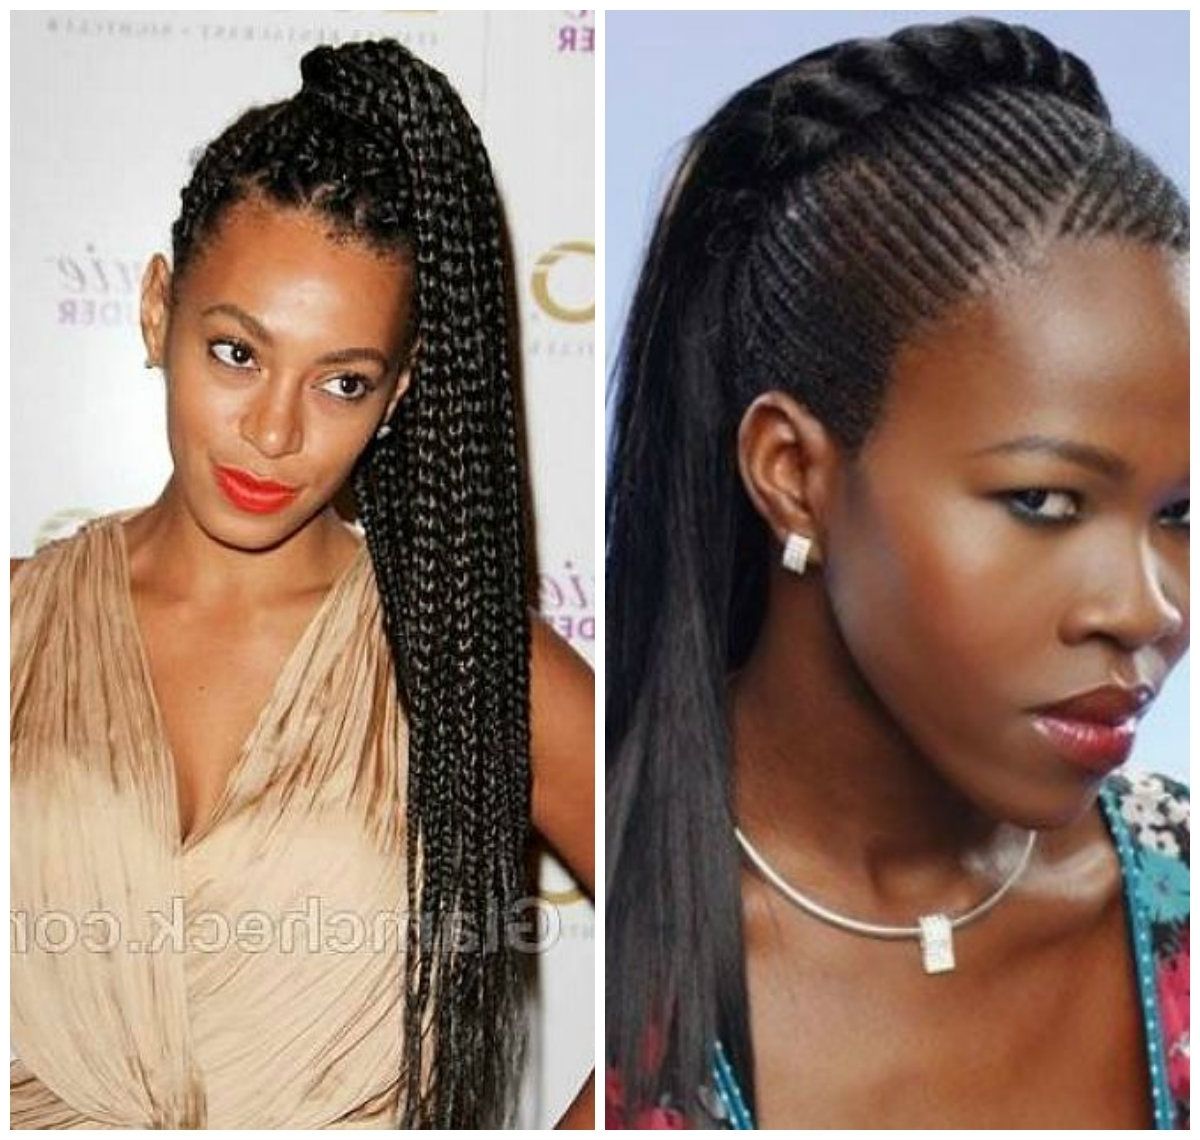 Latest On Top Ponytail Hairstyles For African American Women Intended For Hot African American Stone Age Inspired Braided Hairstyle Ideas (View 10 of 20)